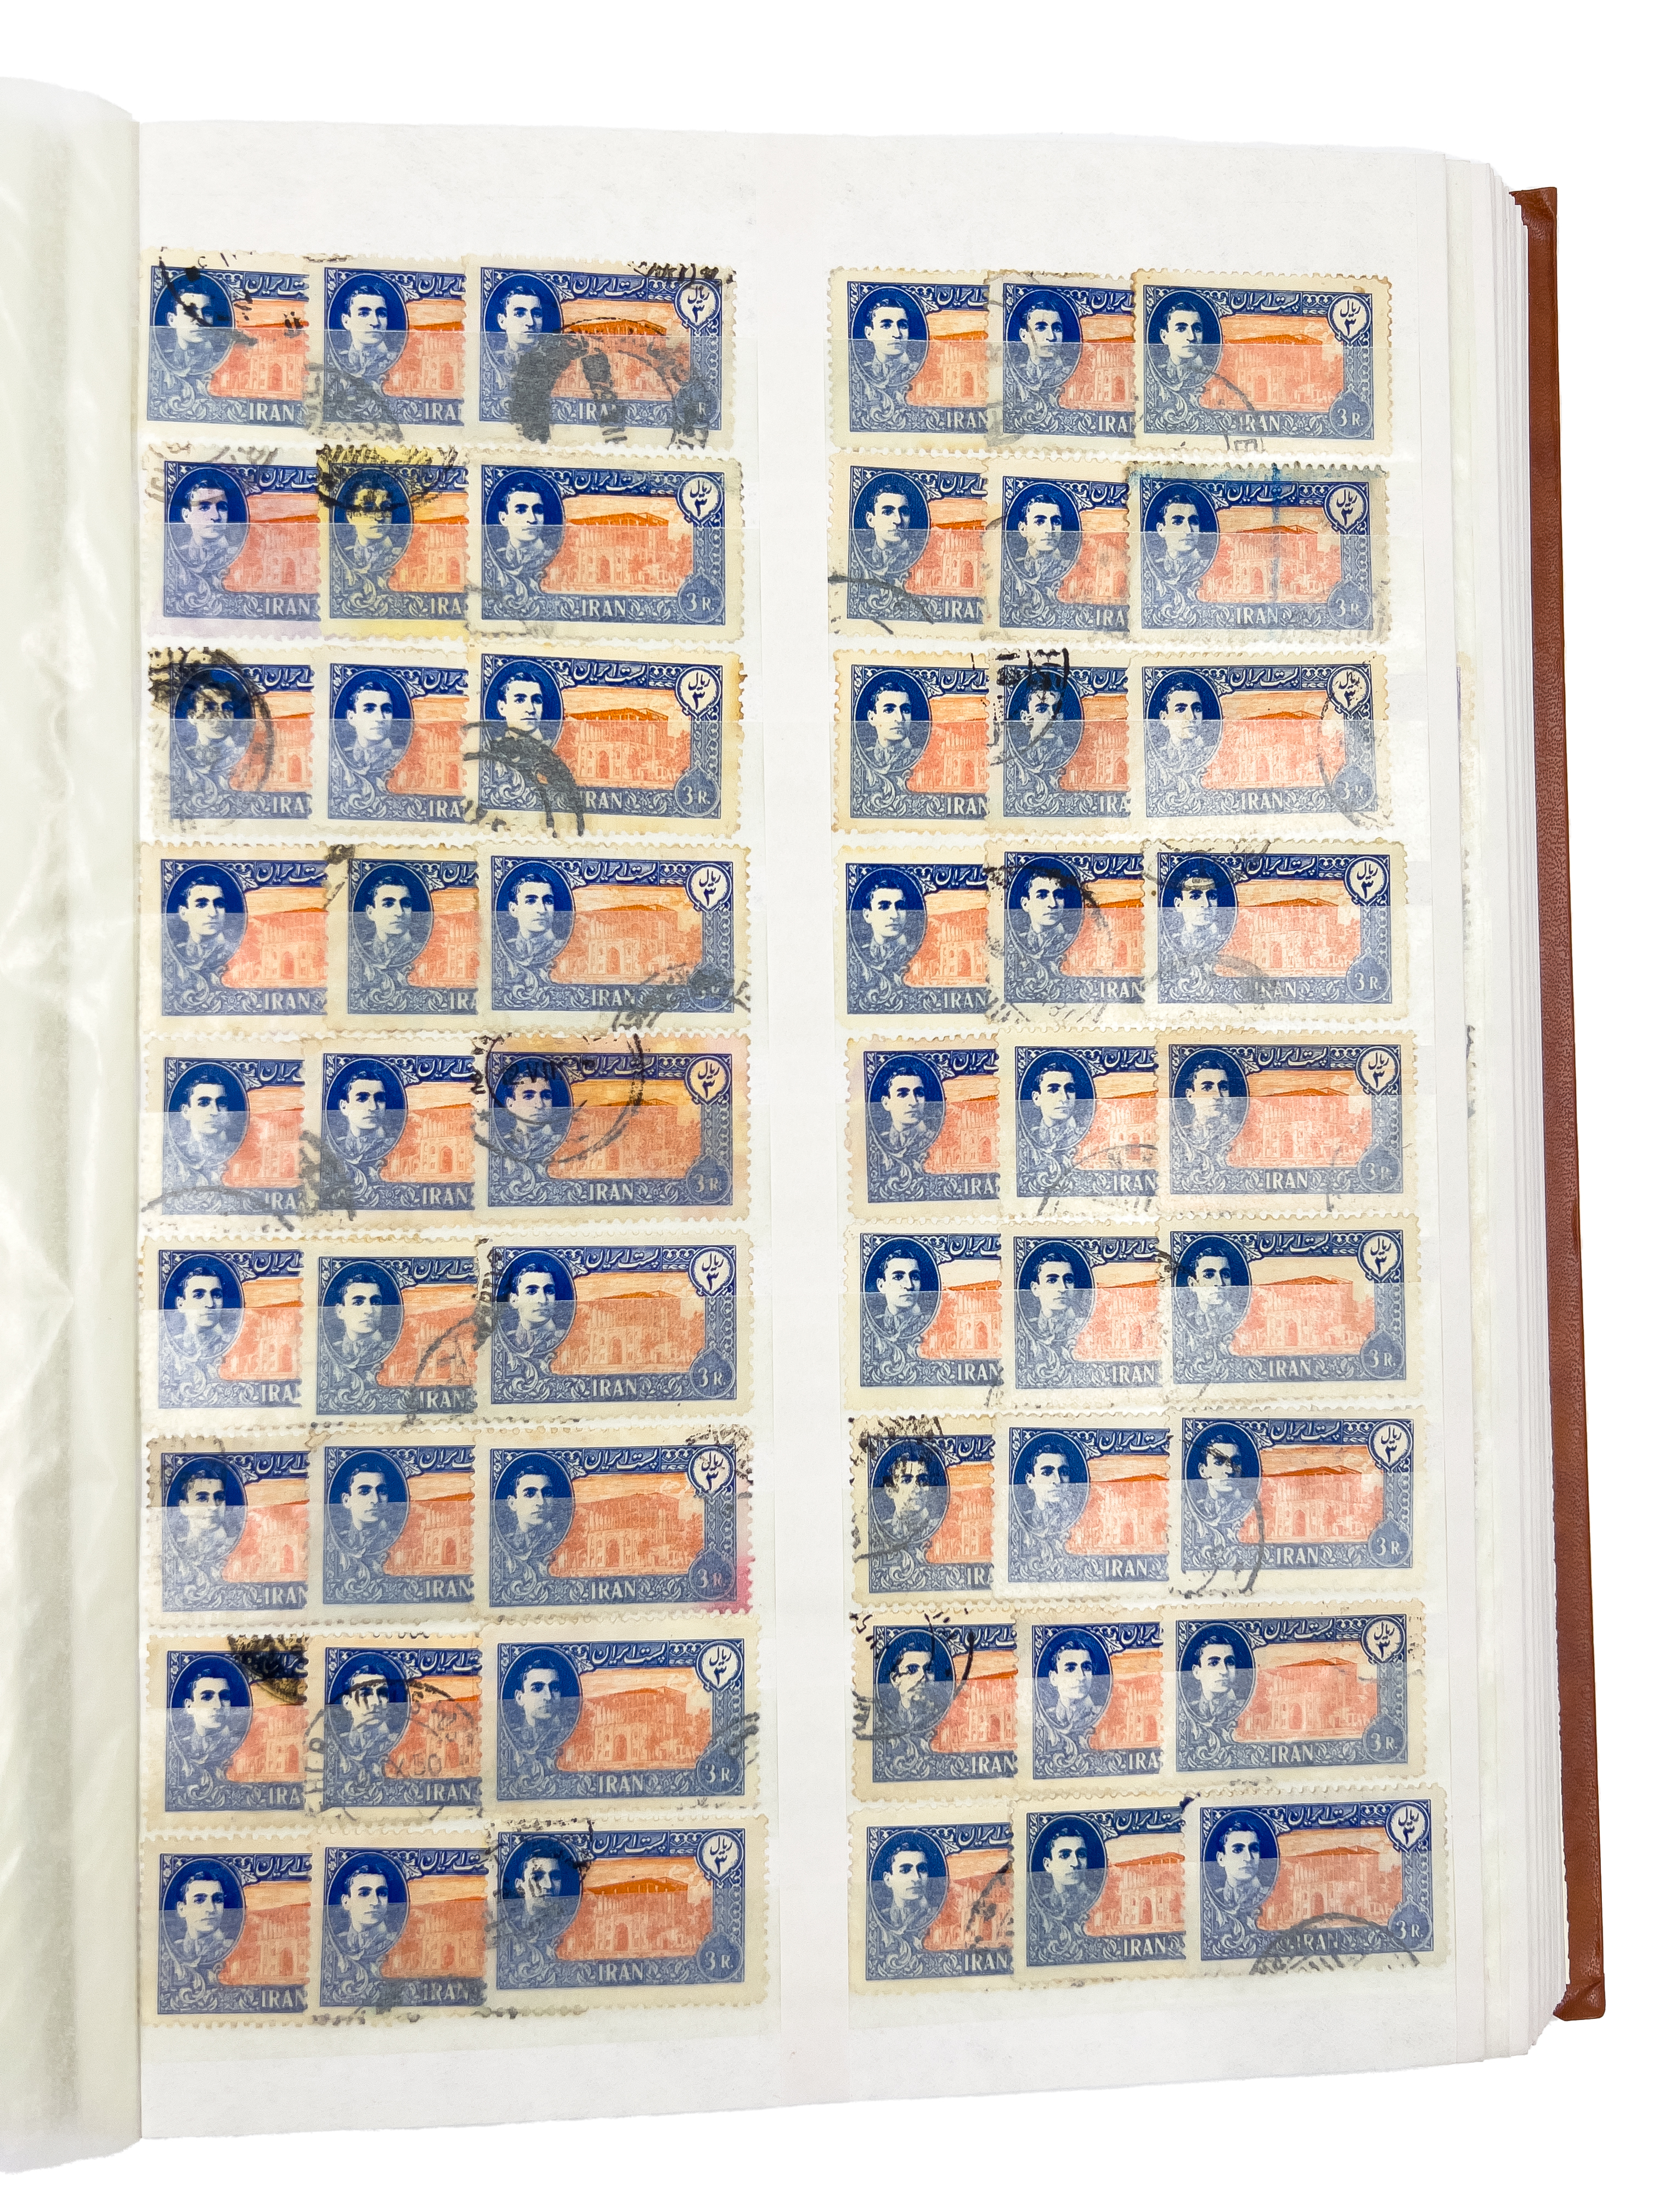 RARE & EXTENSIVE COLLECTION OF PERSIAN PAHLAVI POST STAMPS - Image 34 of 63